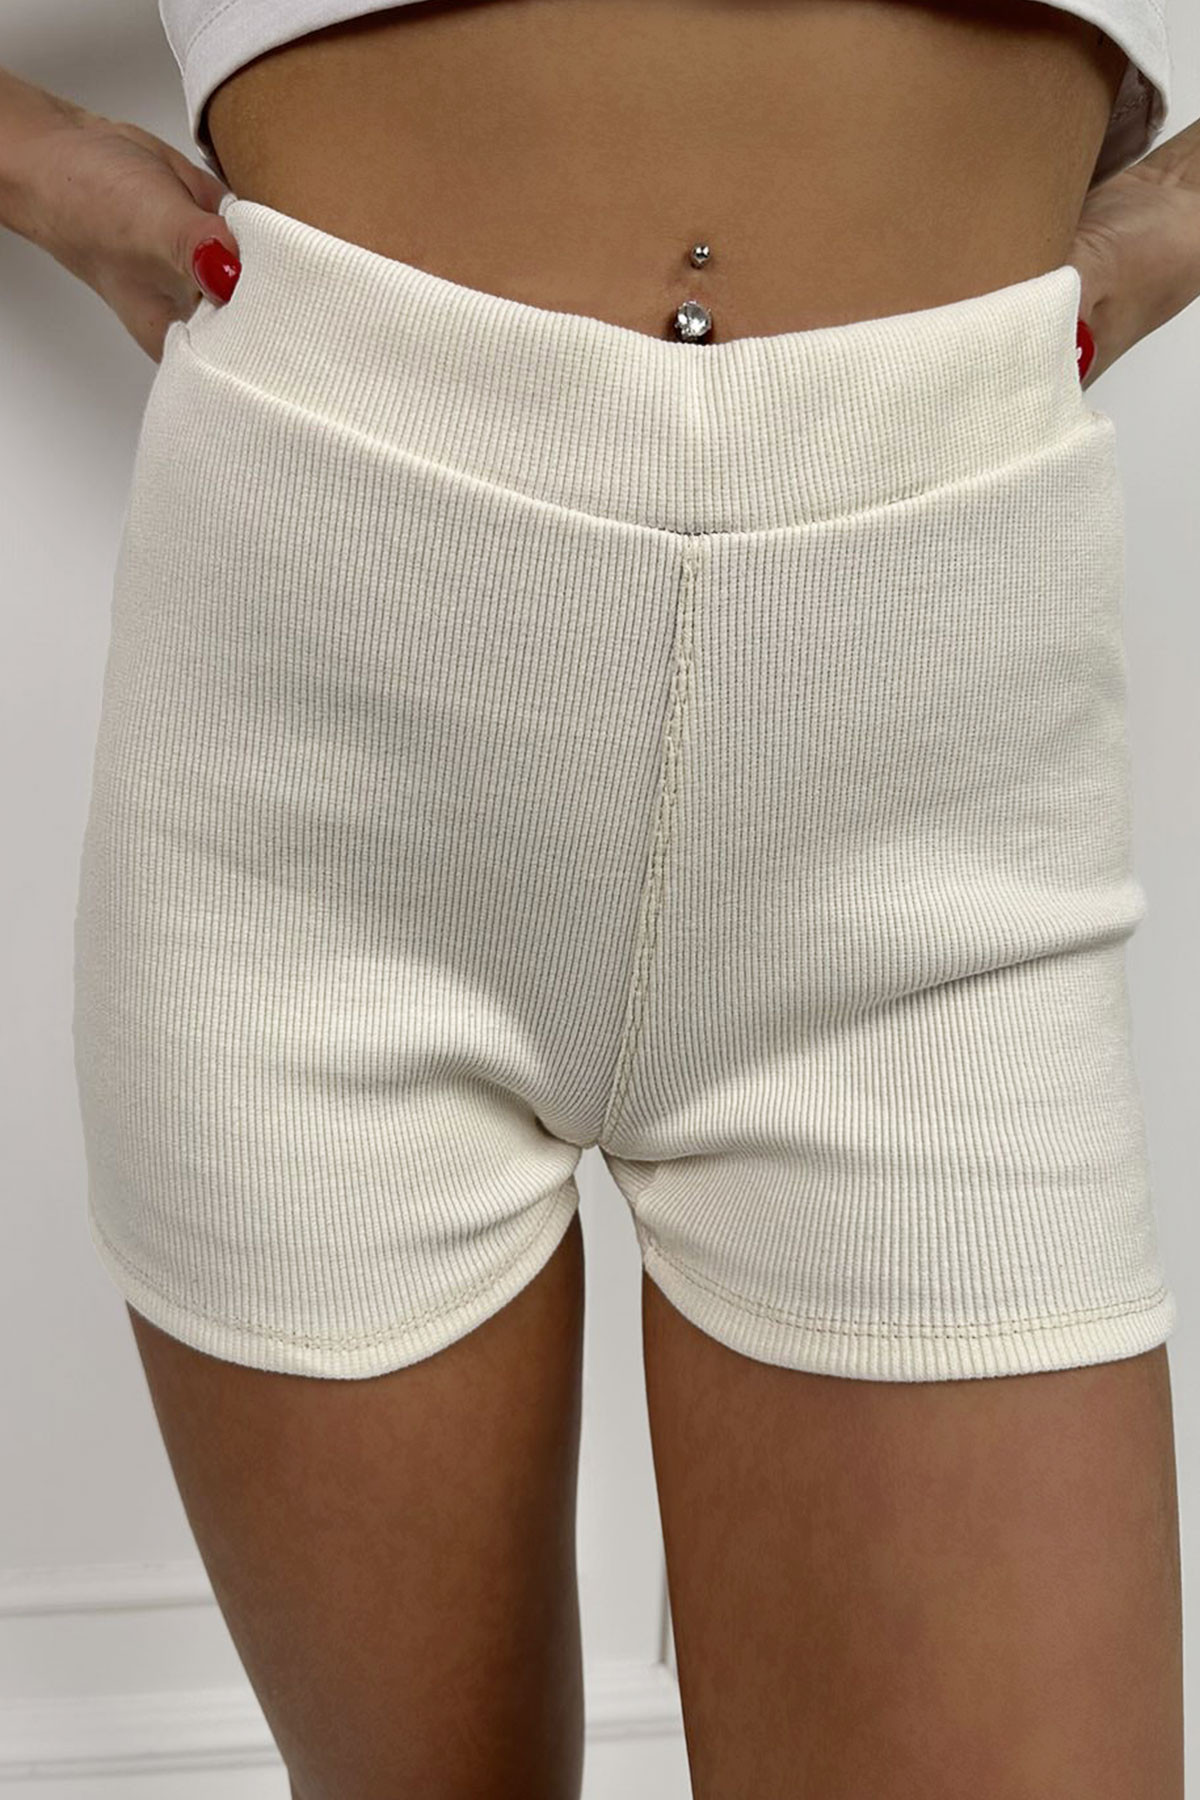 Ladies short pants   - Women's and men's clothing and